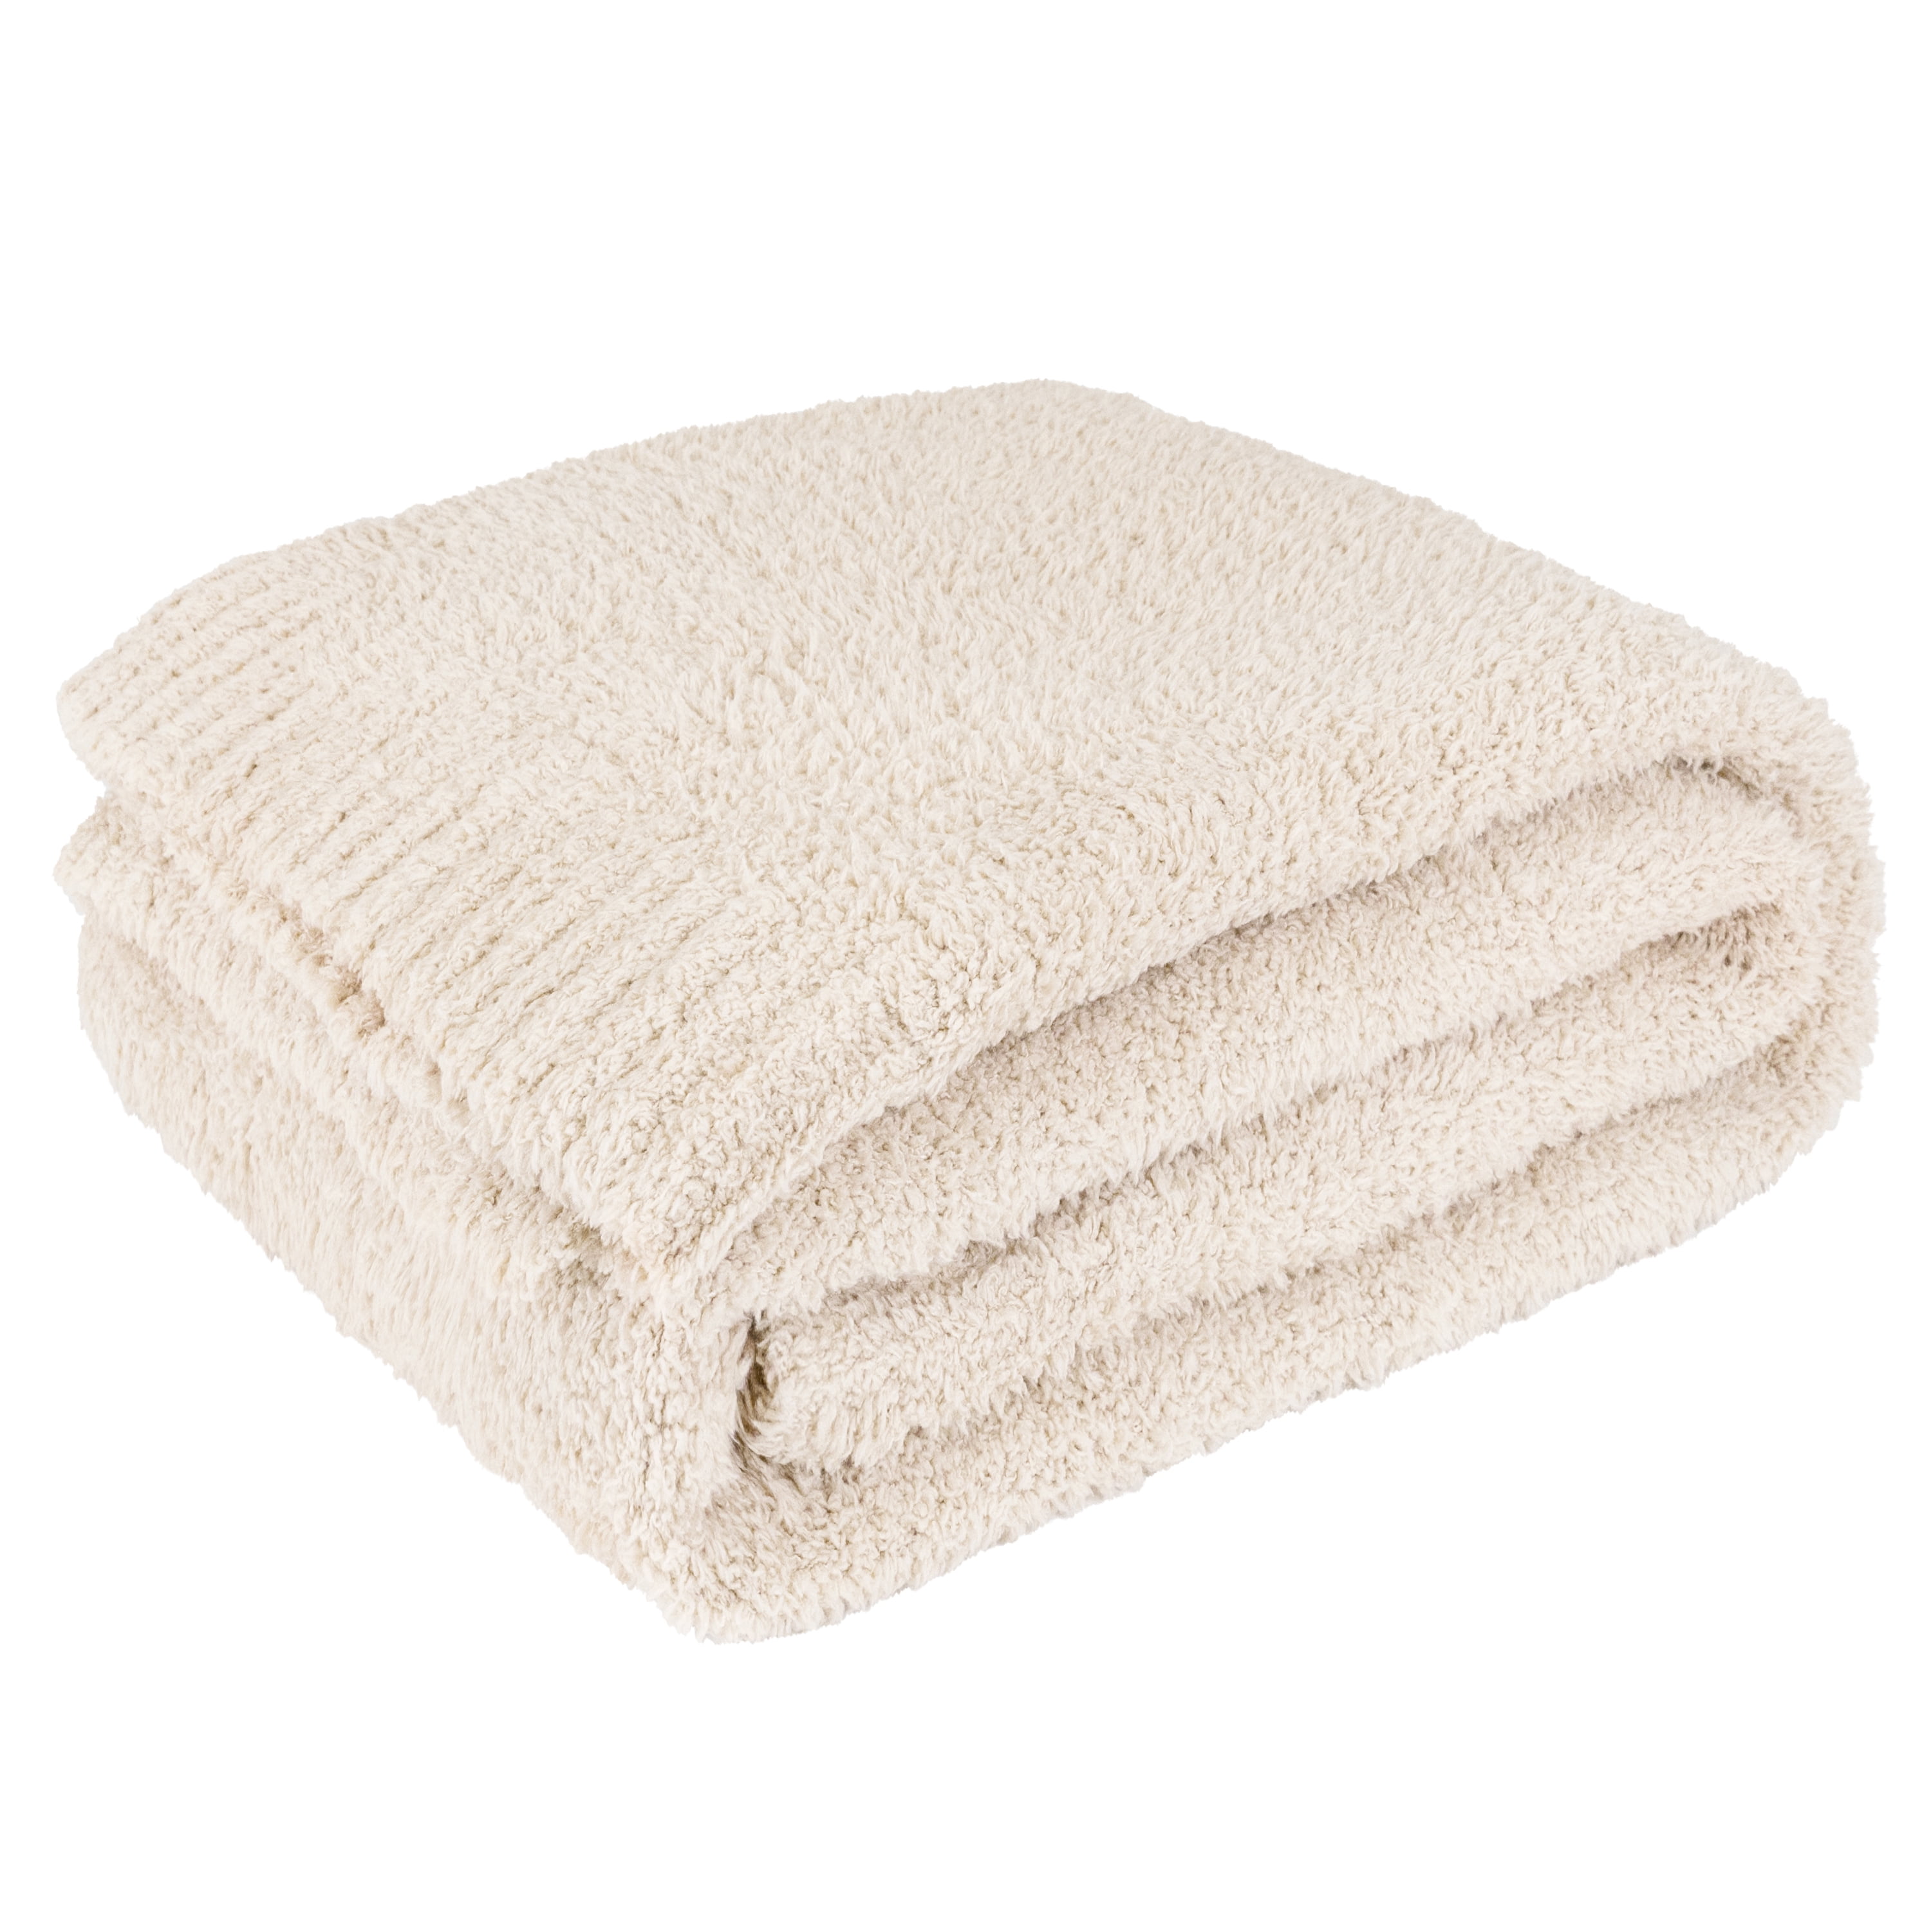 PAVILIA Plush Knit Throw Blanket for Couch, Super Soft Fluffy